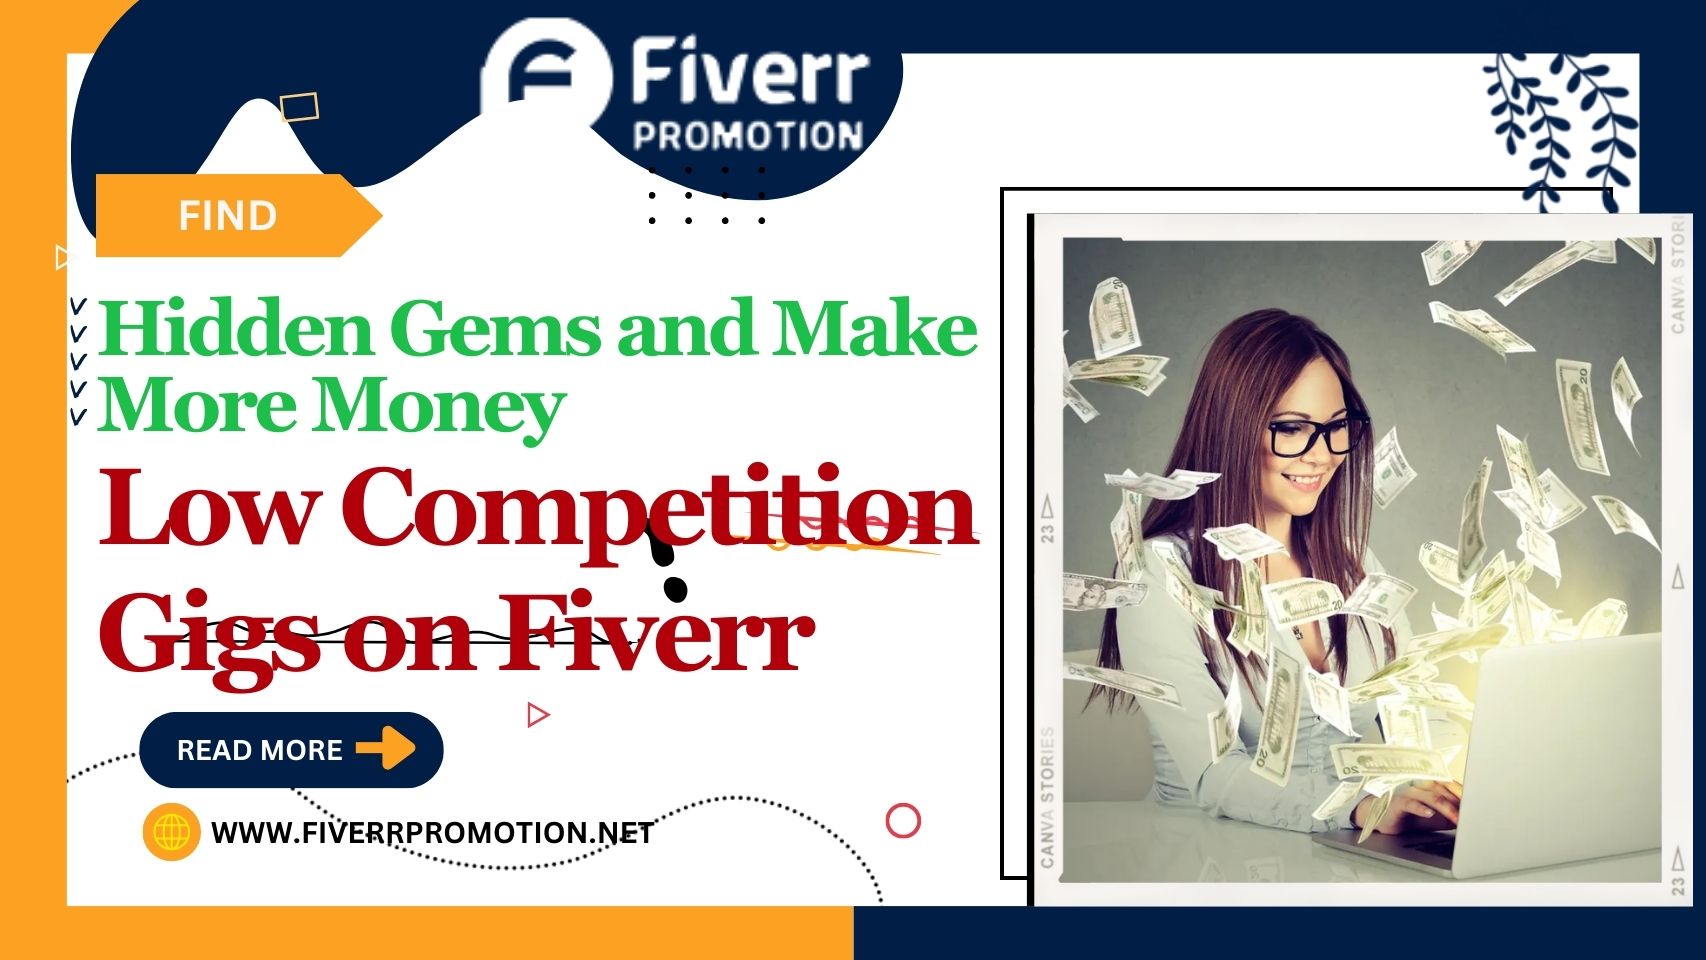 Low Competition Gigs on Fiverr 2023: Find Hidden Gems and Make More Money